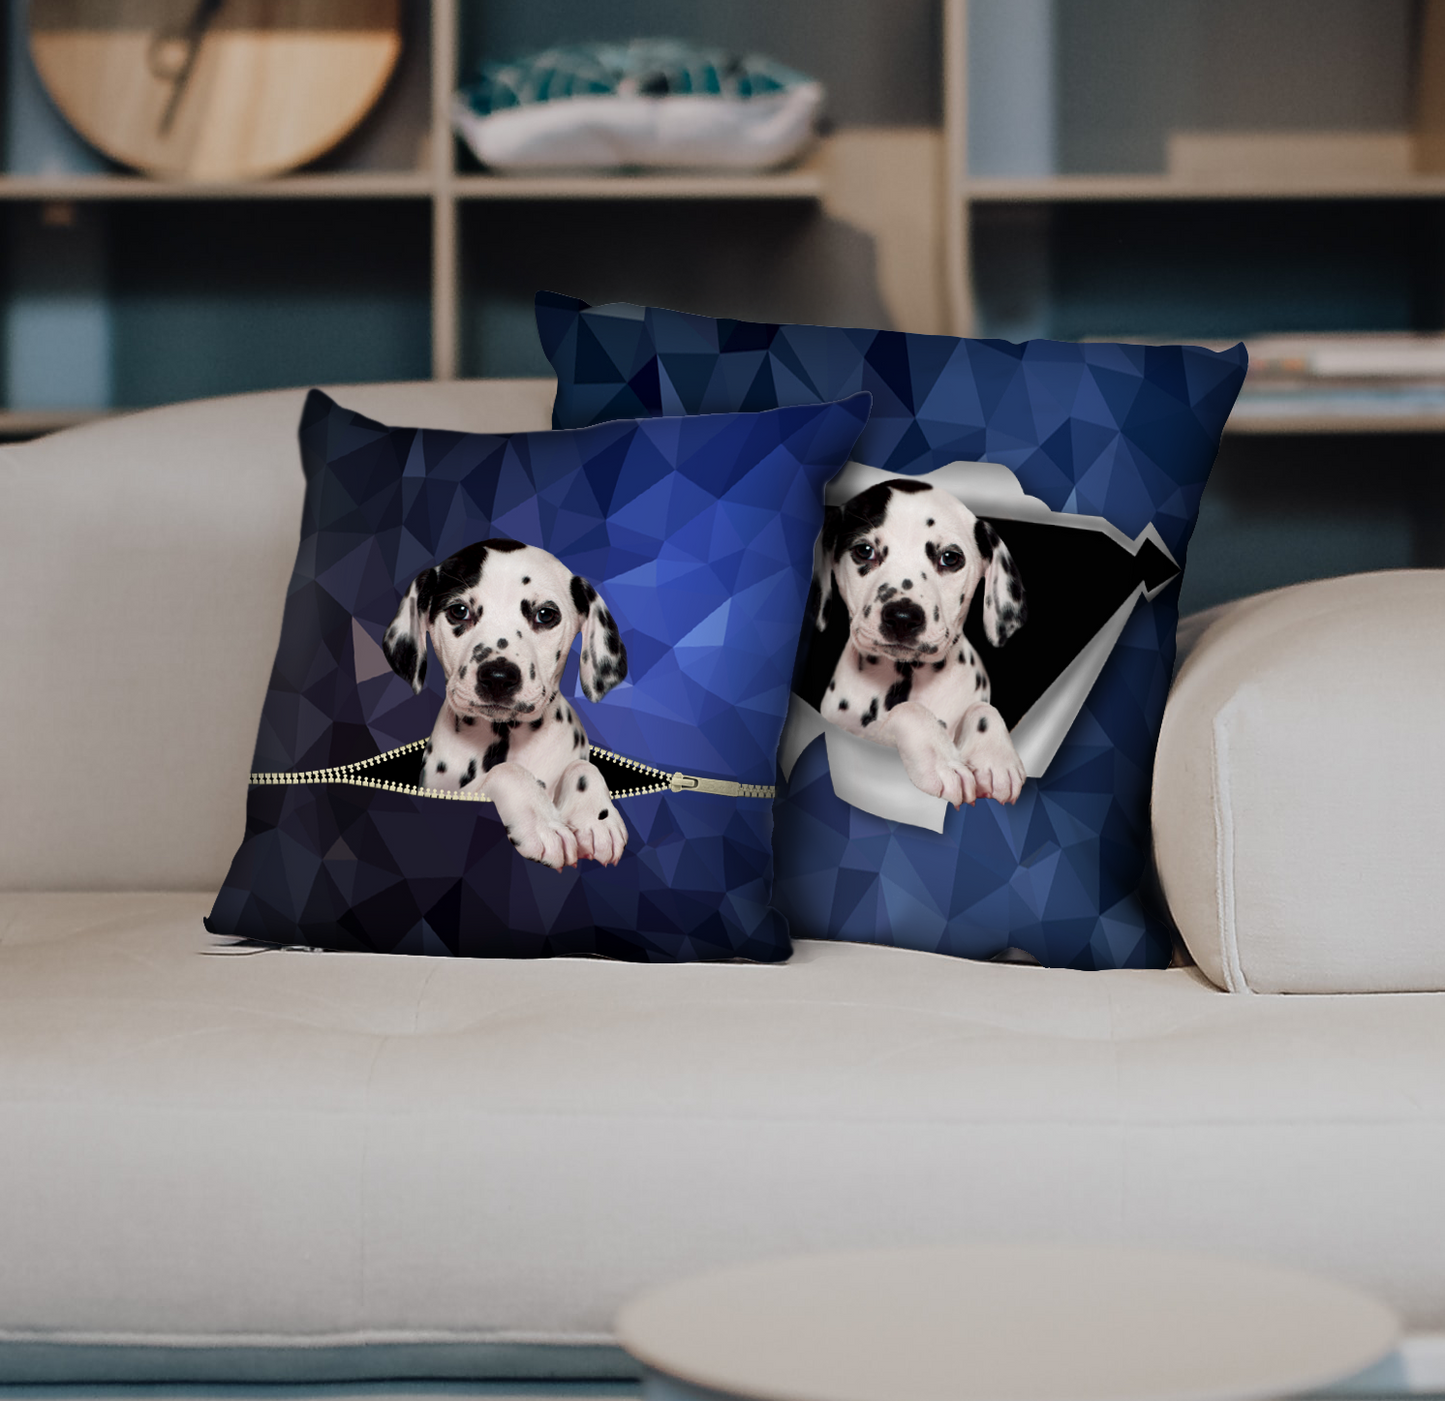 They Steal Your Couch - Dalmatian Pillow Cases V1 (Set of 2)